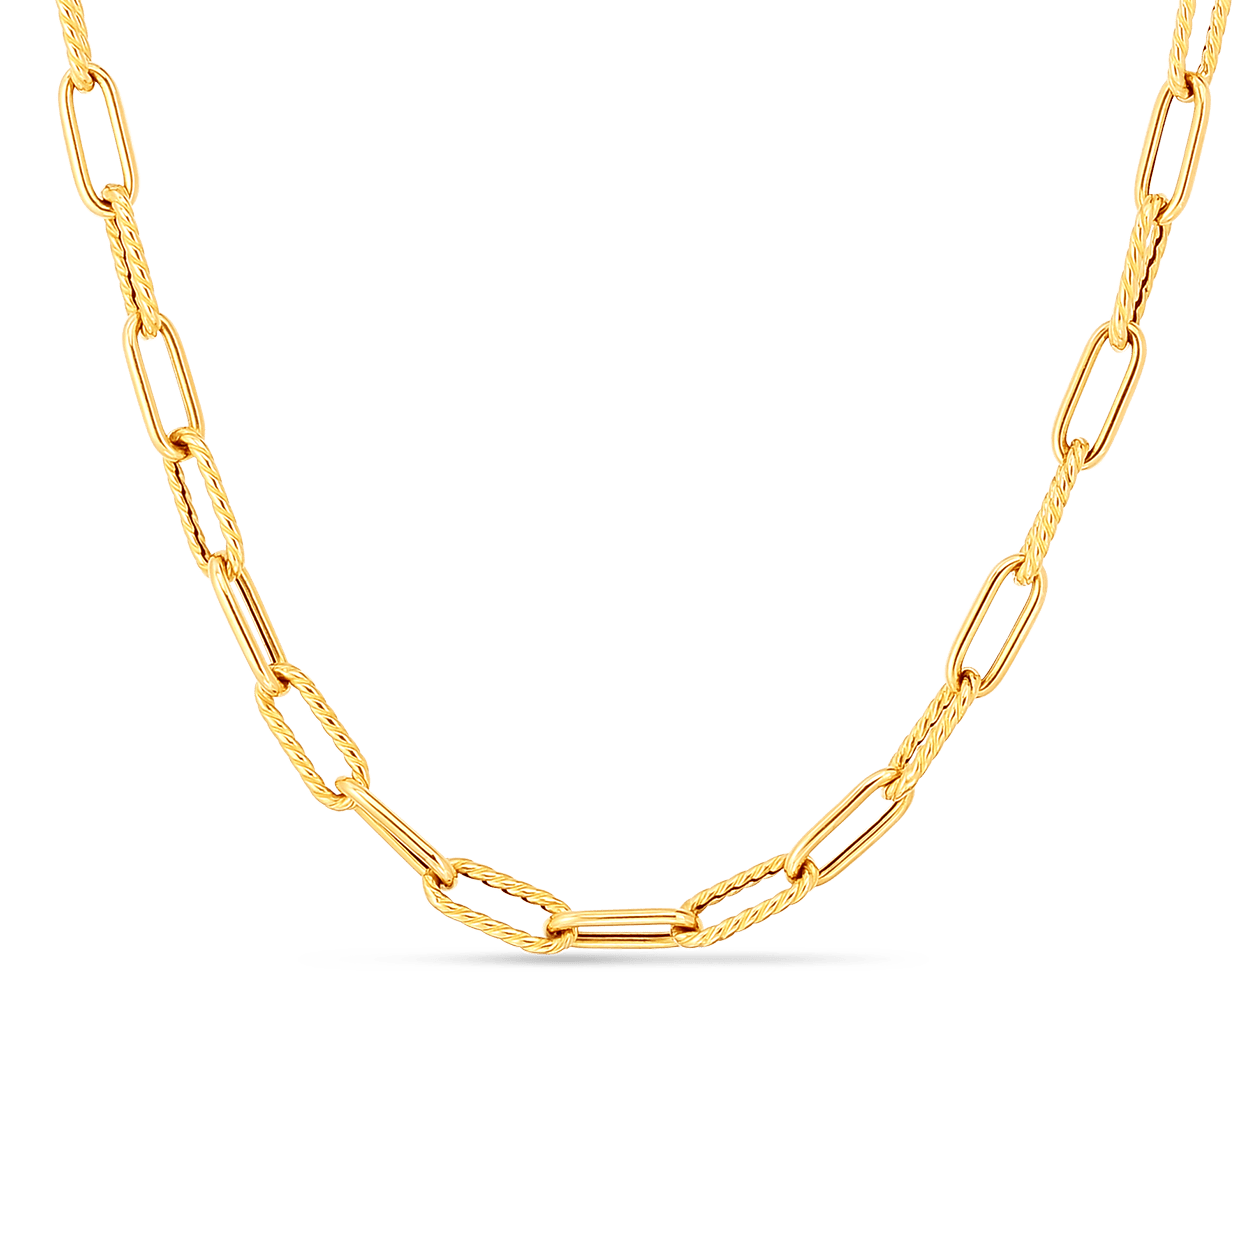 Roberto Coin 18K Yellow Gold Alternating Shiny/Fluted Paperclip Chain